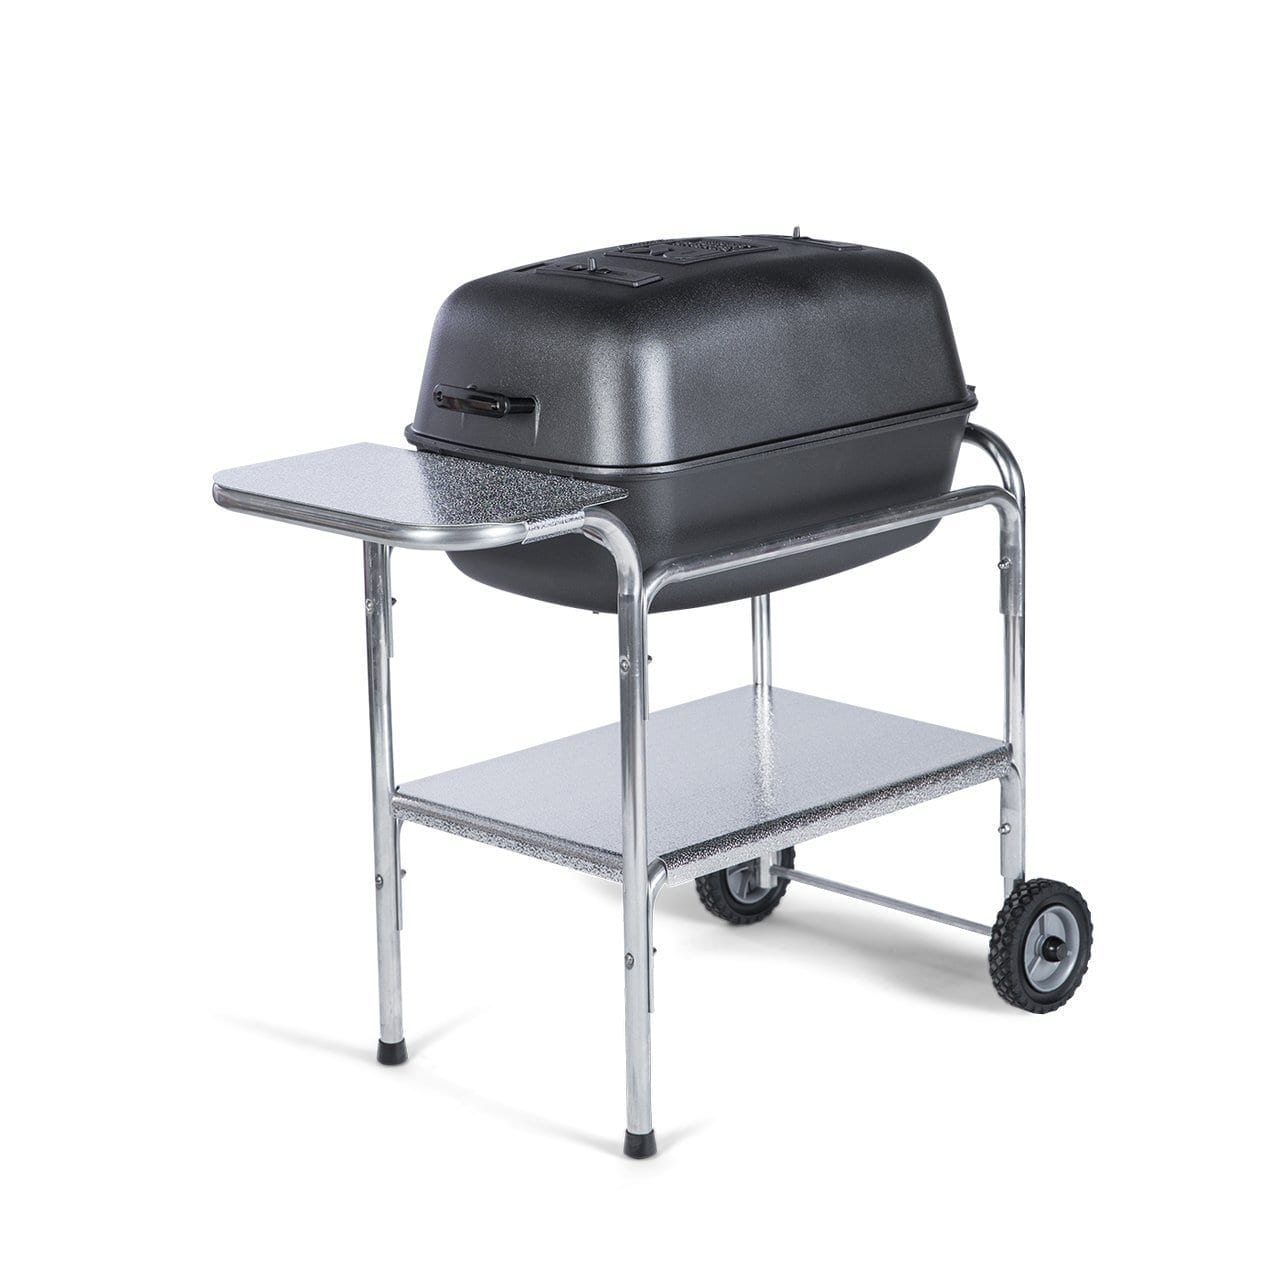 Tailgater Charcoal Grill - Pitts & Spitts